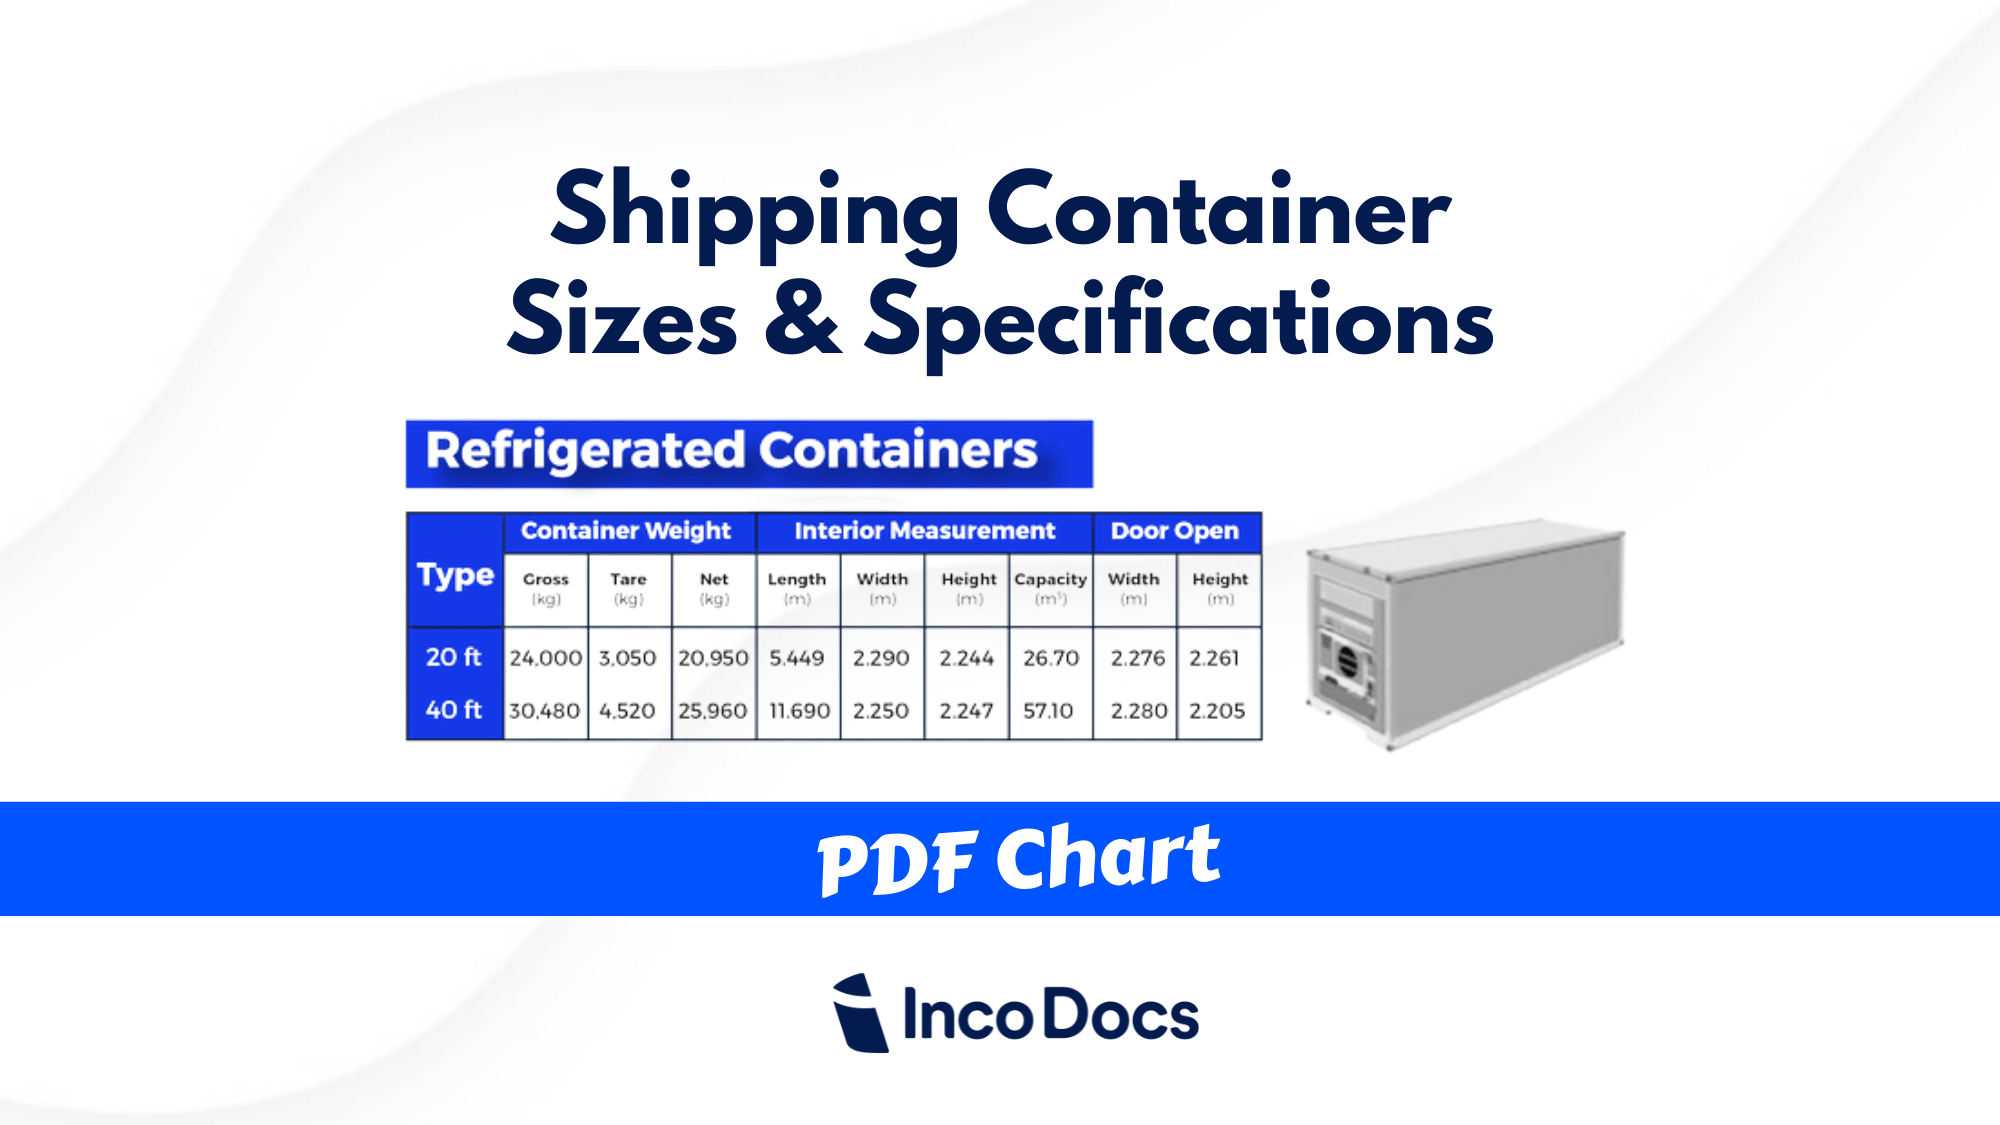 https://incodocs.com/blog/wp-content/uploads/2018/09/Shipping-Container-Sizes-Specifications-Chart-Download.png